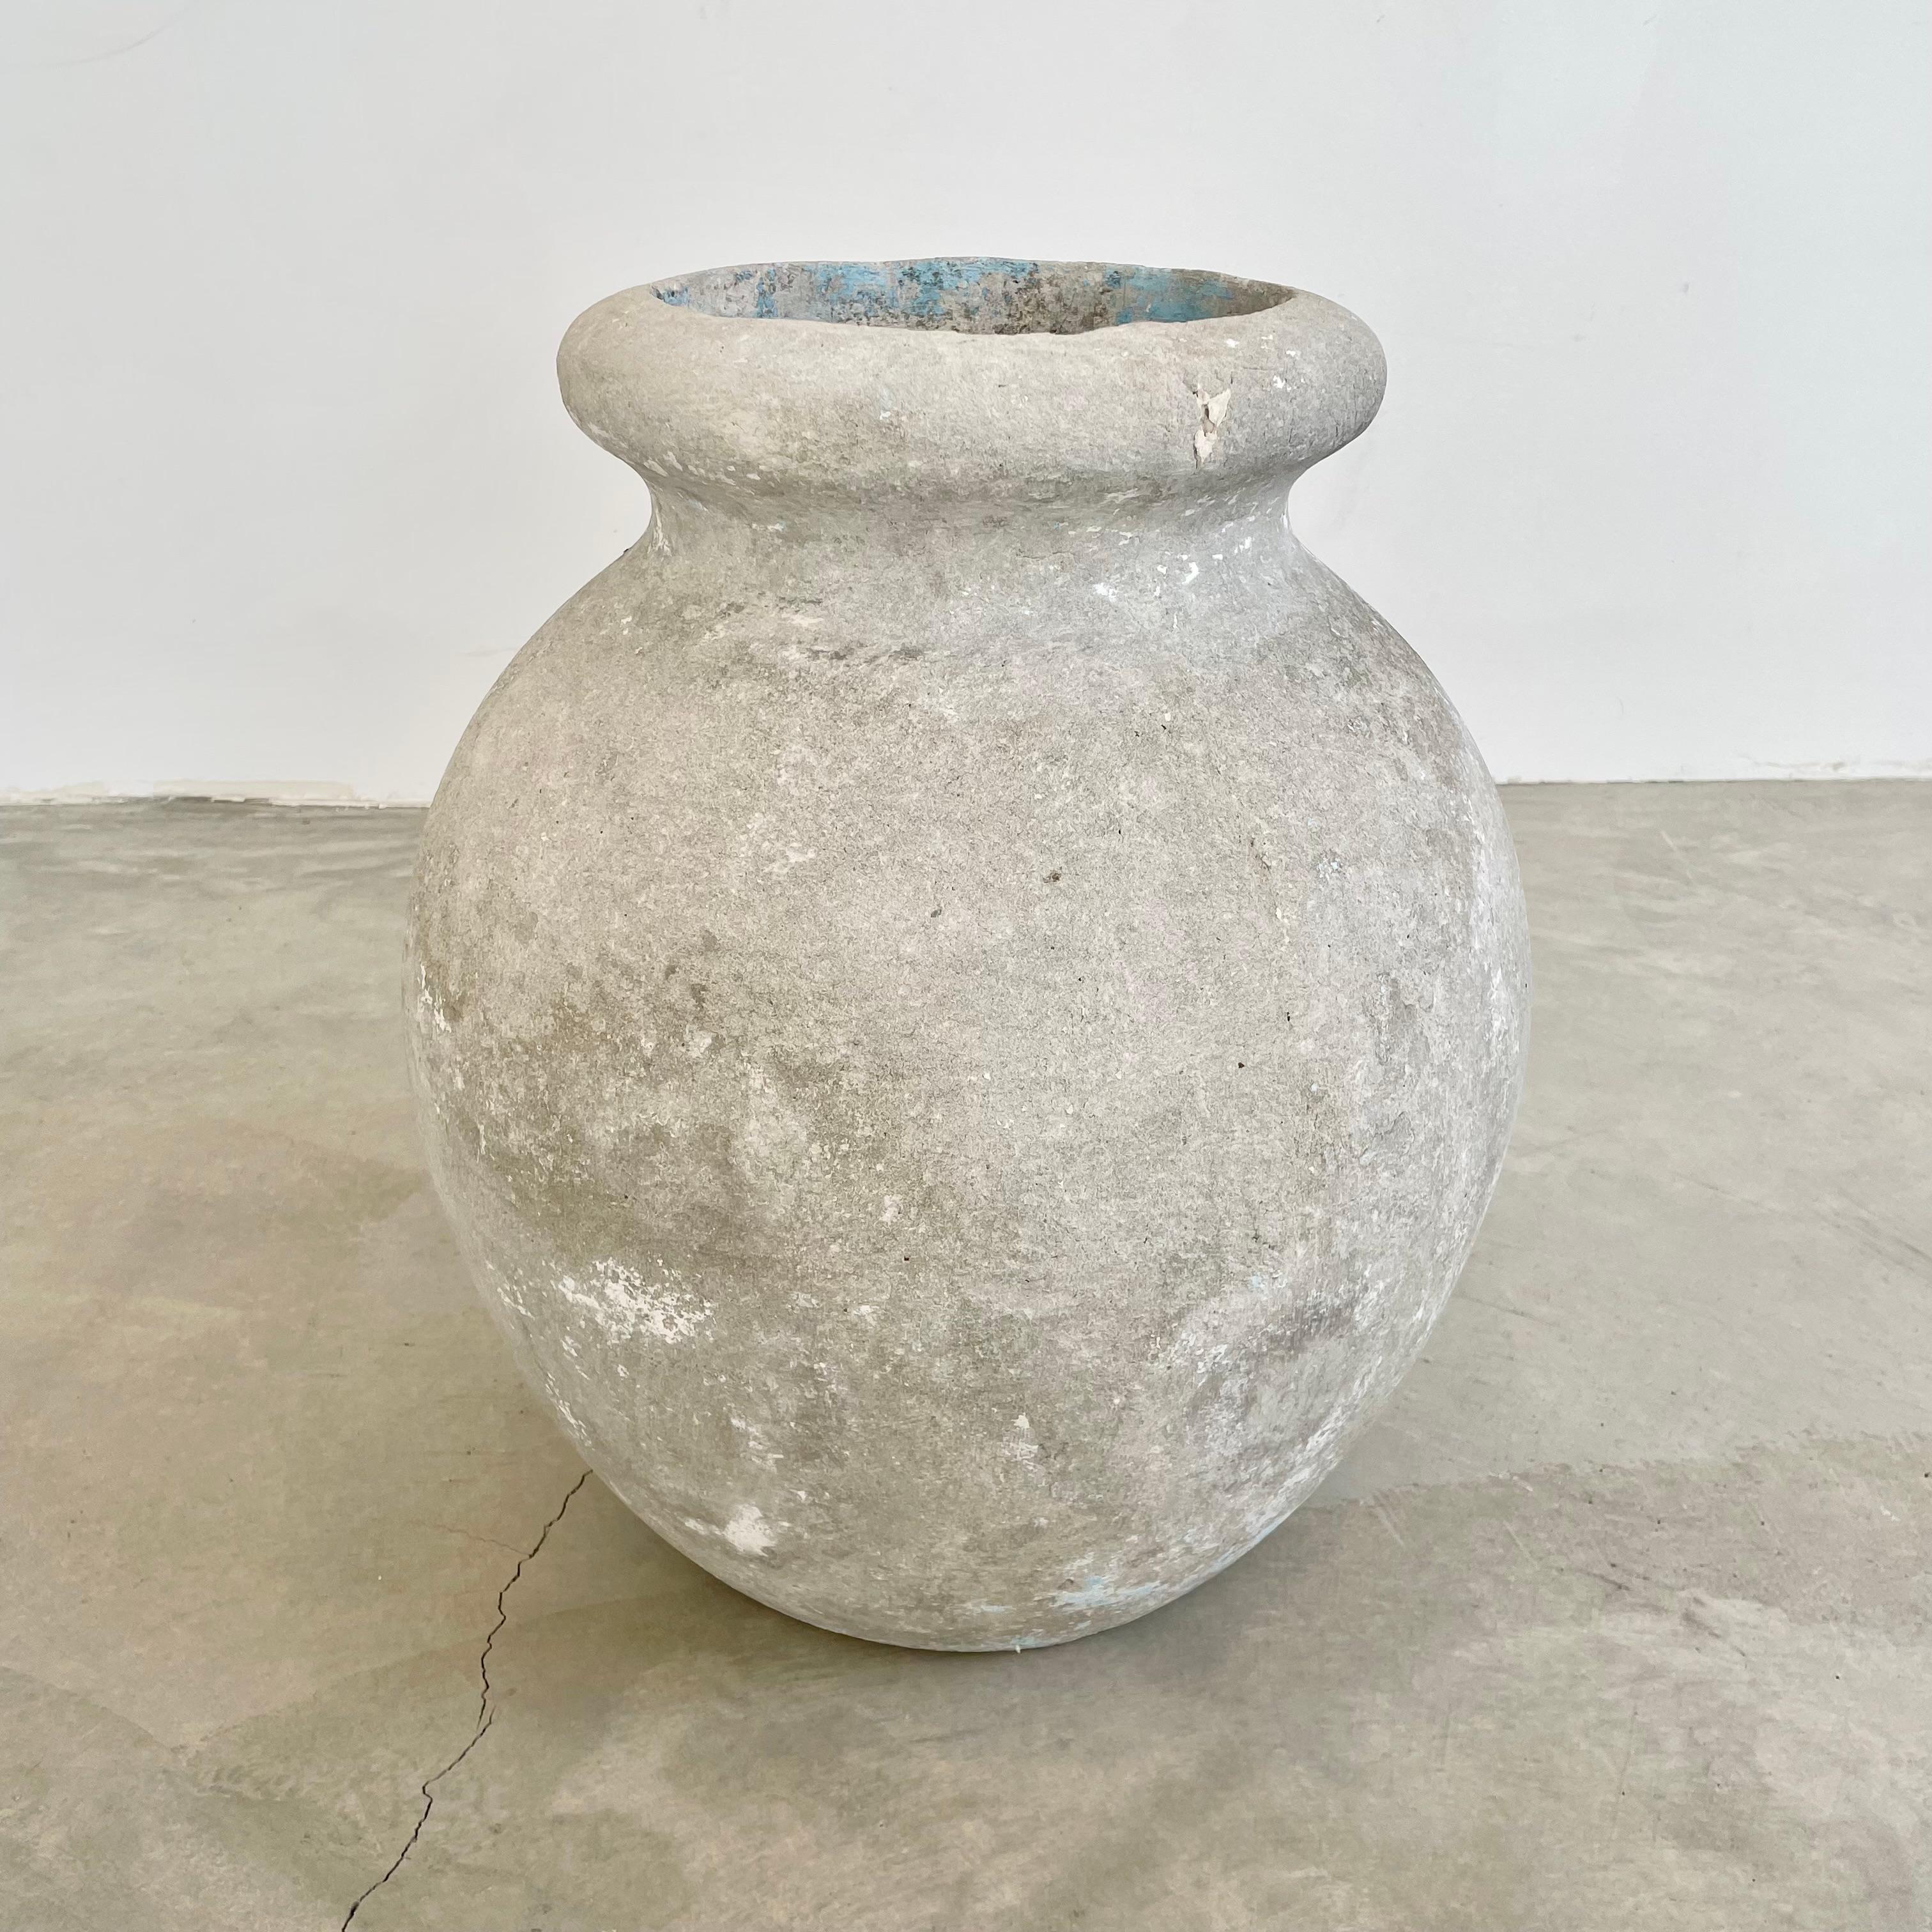 Concrete olive jar planter by Willy Guhl with great patina and prominent presence. Beautiful light patina with white and blue flecks. Simple and elegant design perfect for any garden or patio. Excellent vintage condition. One available in this